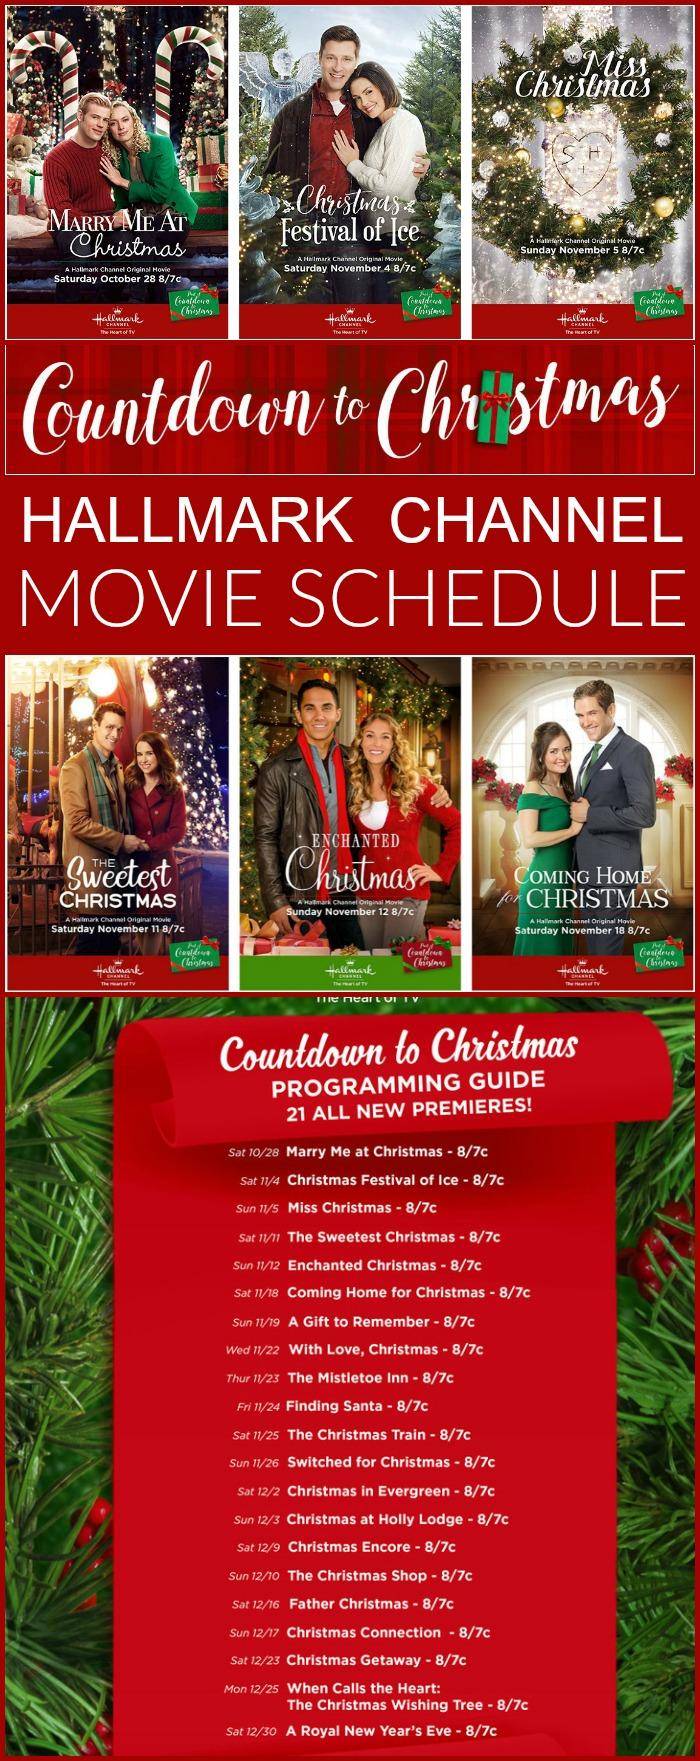 The Hallmark Channel "Countdown to Christmas" Movie Schedule + Chance to WIN $20,000 - ModMomTV